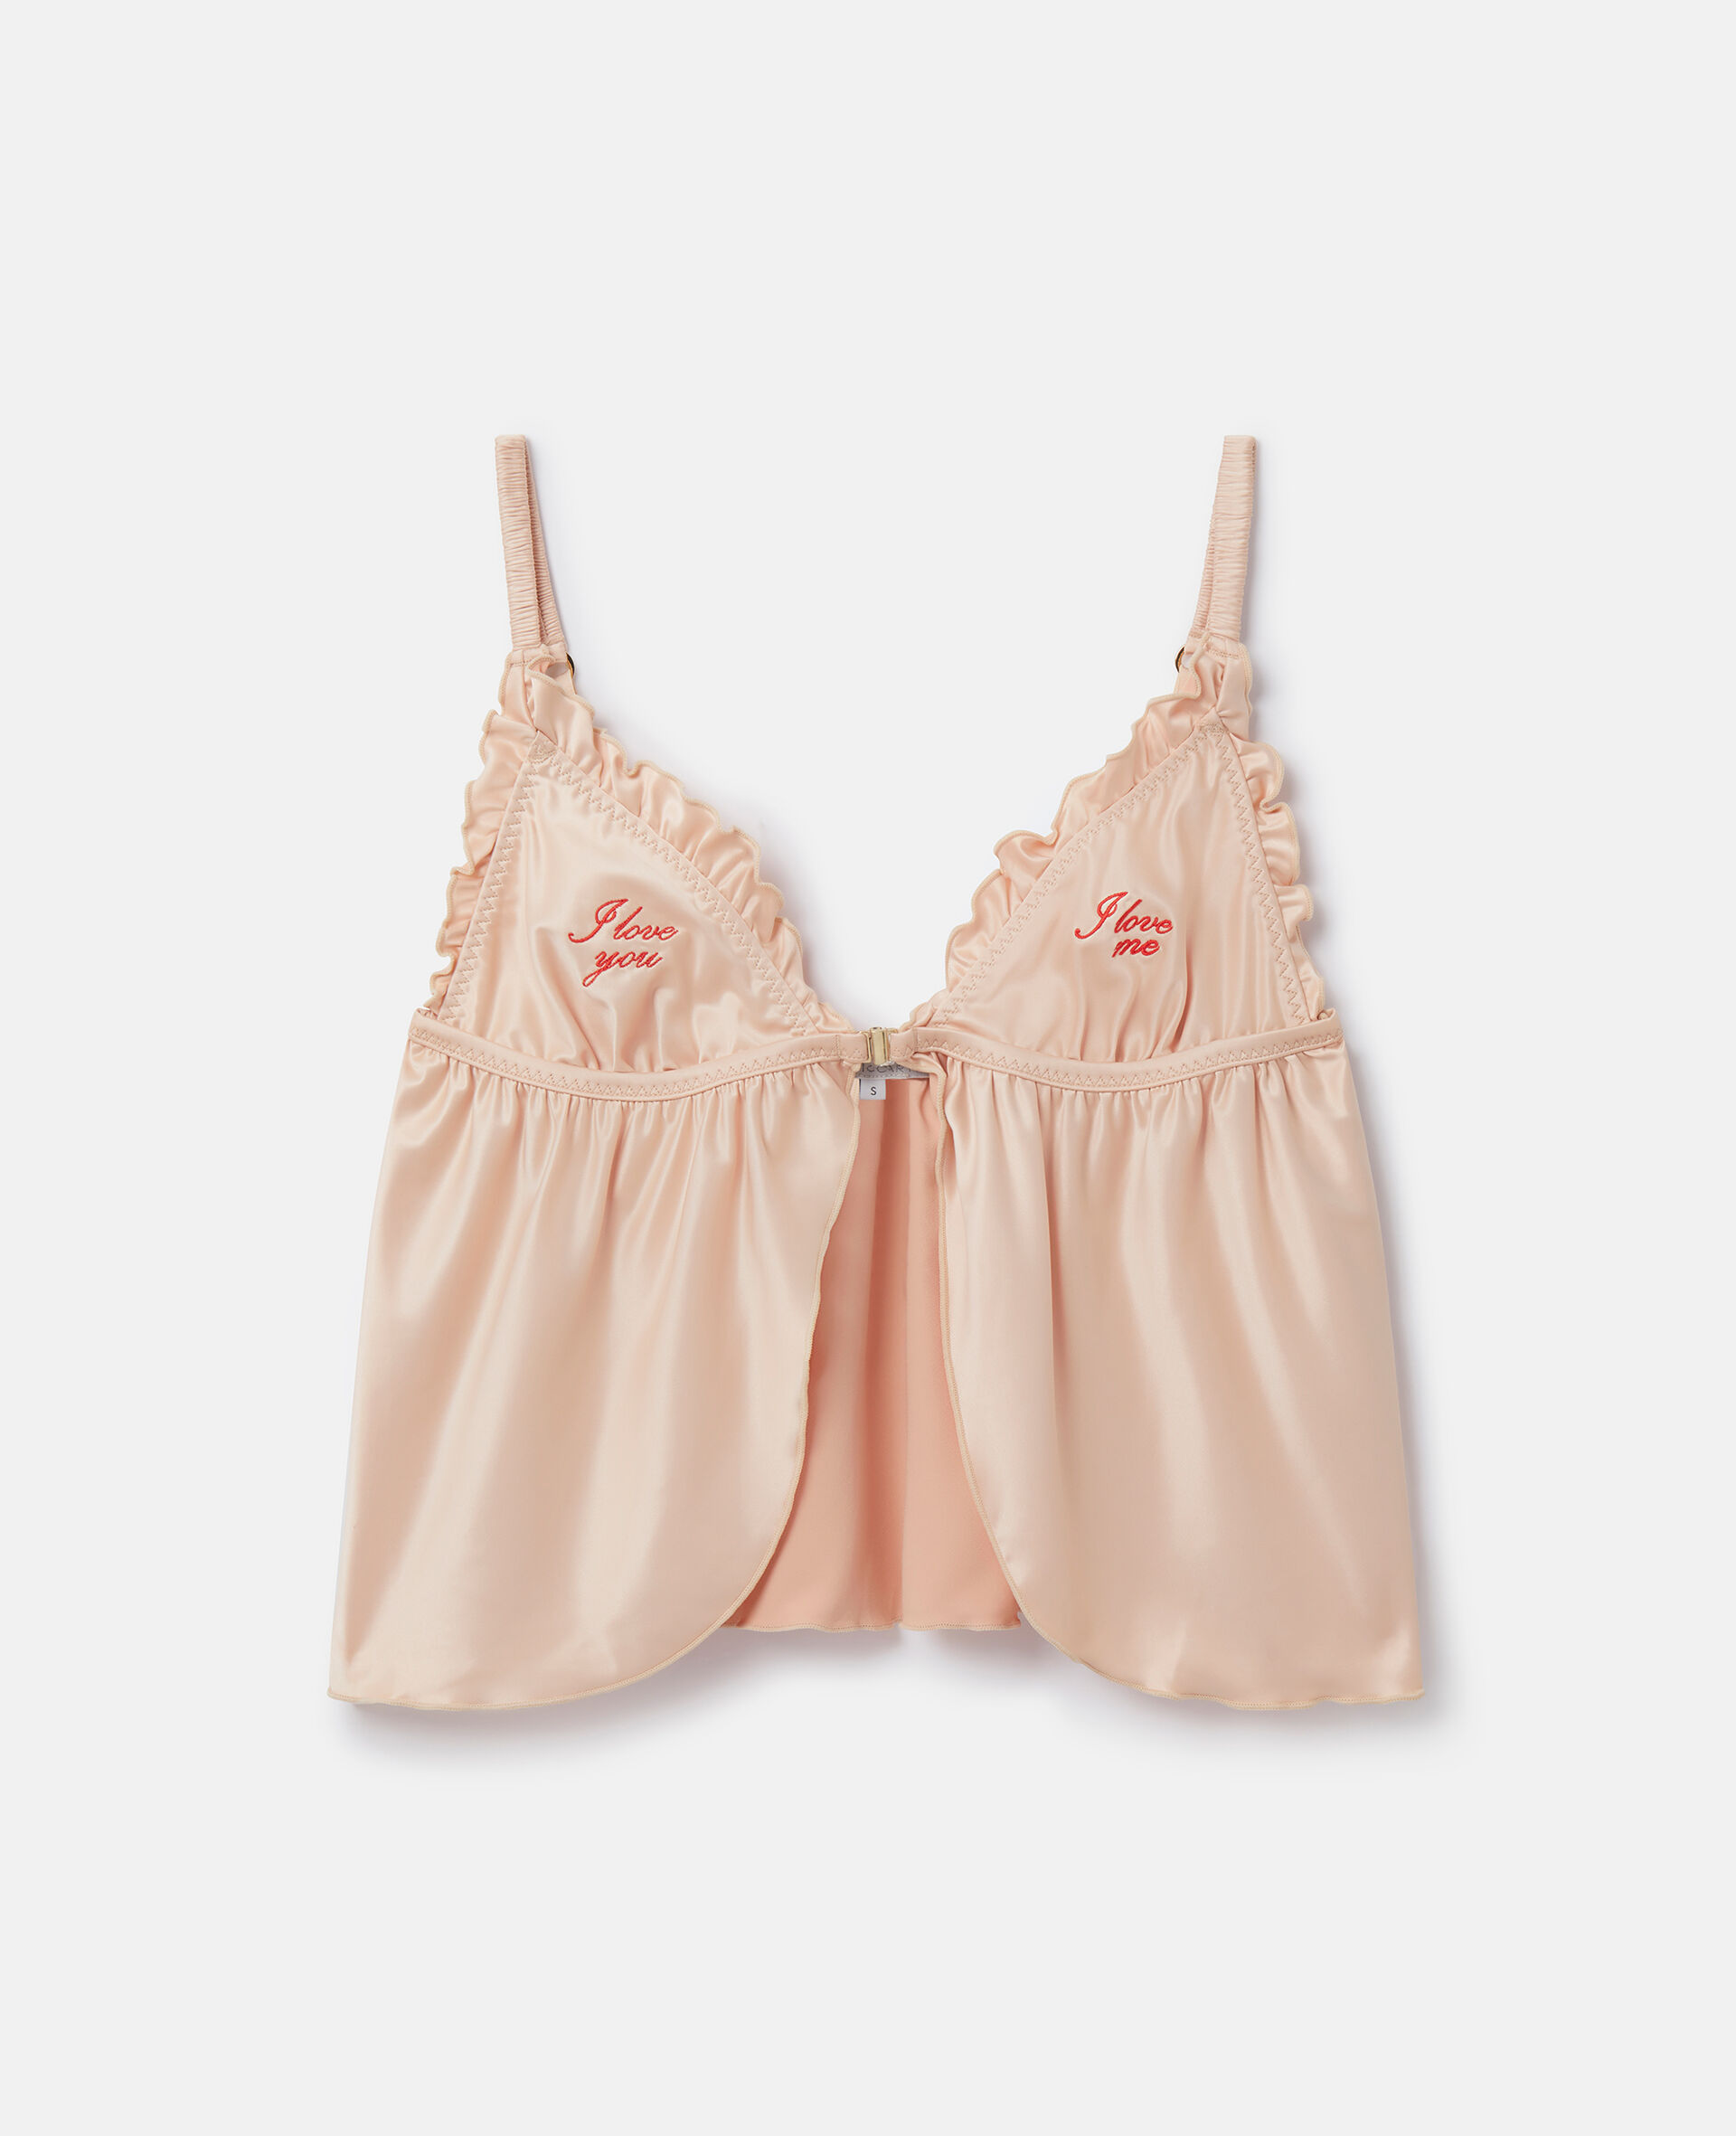 'Love You' Embroidery Satin Flounce Camisole-Beige-large image number 0